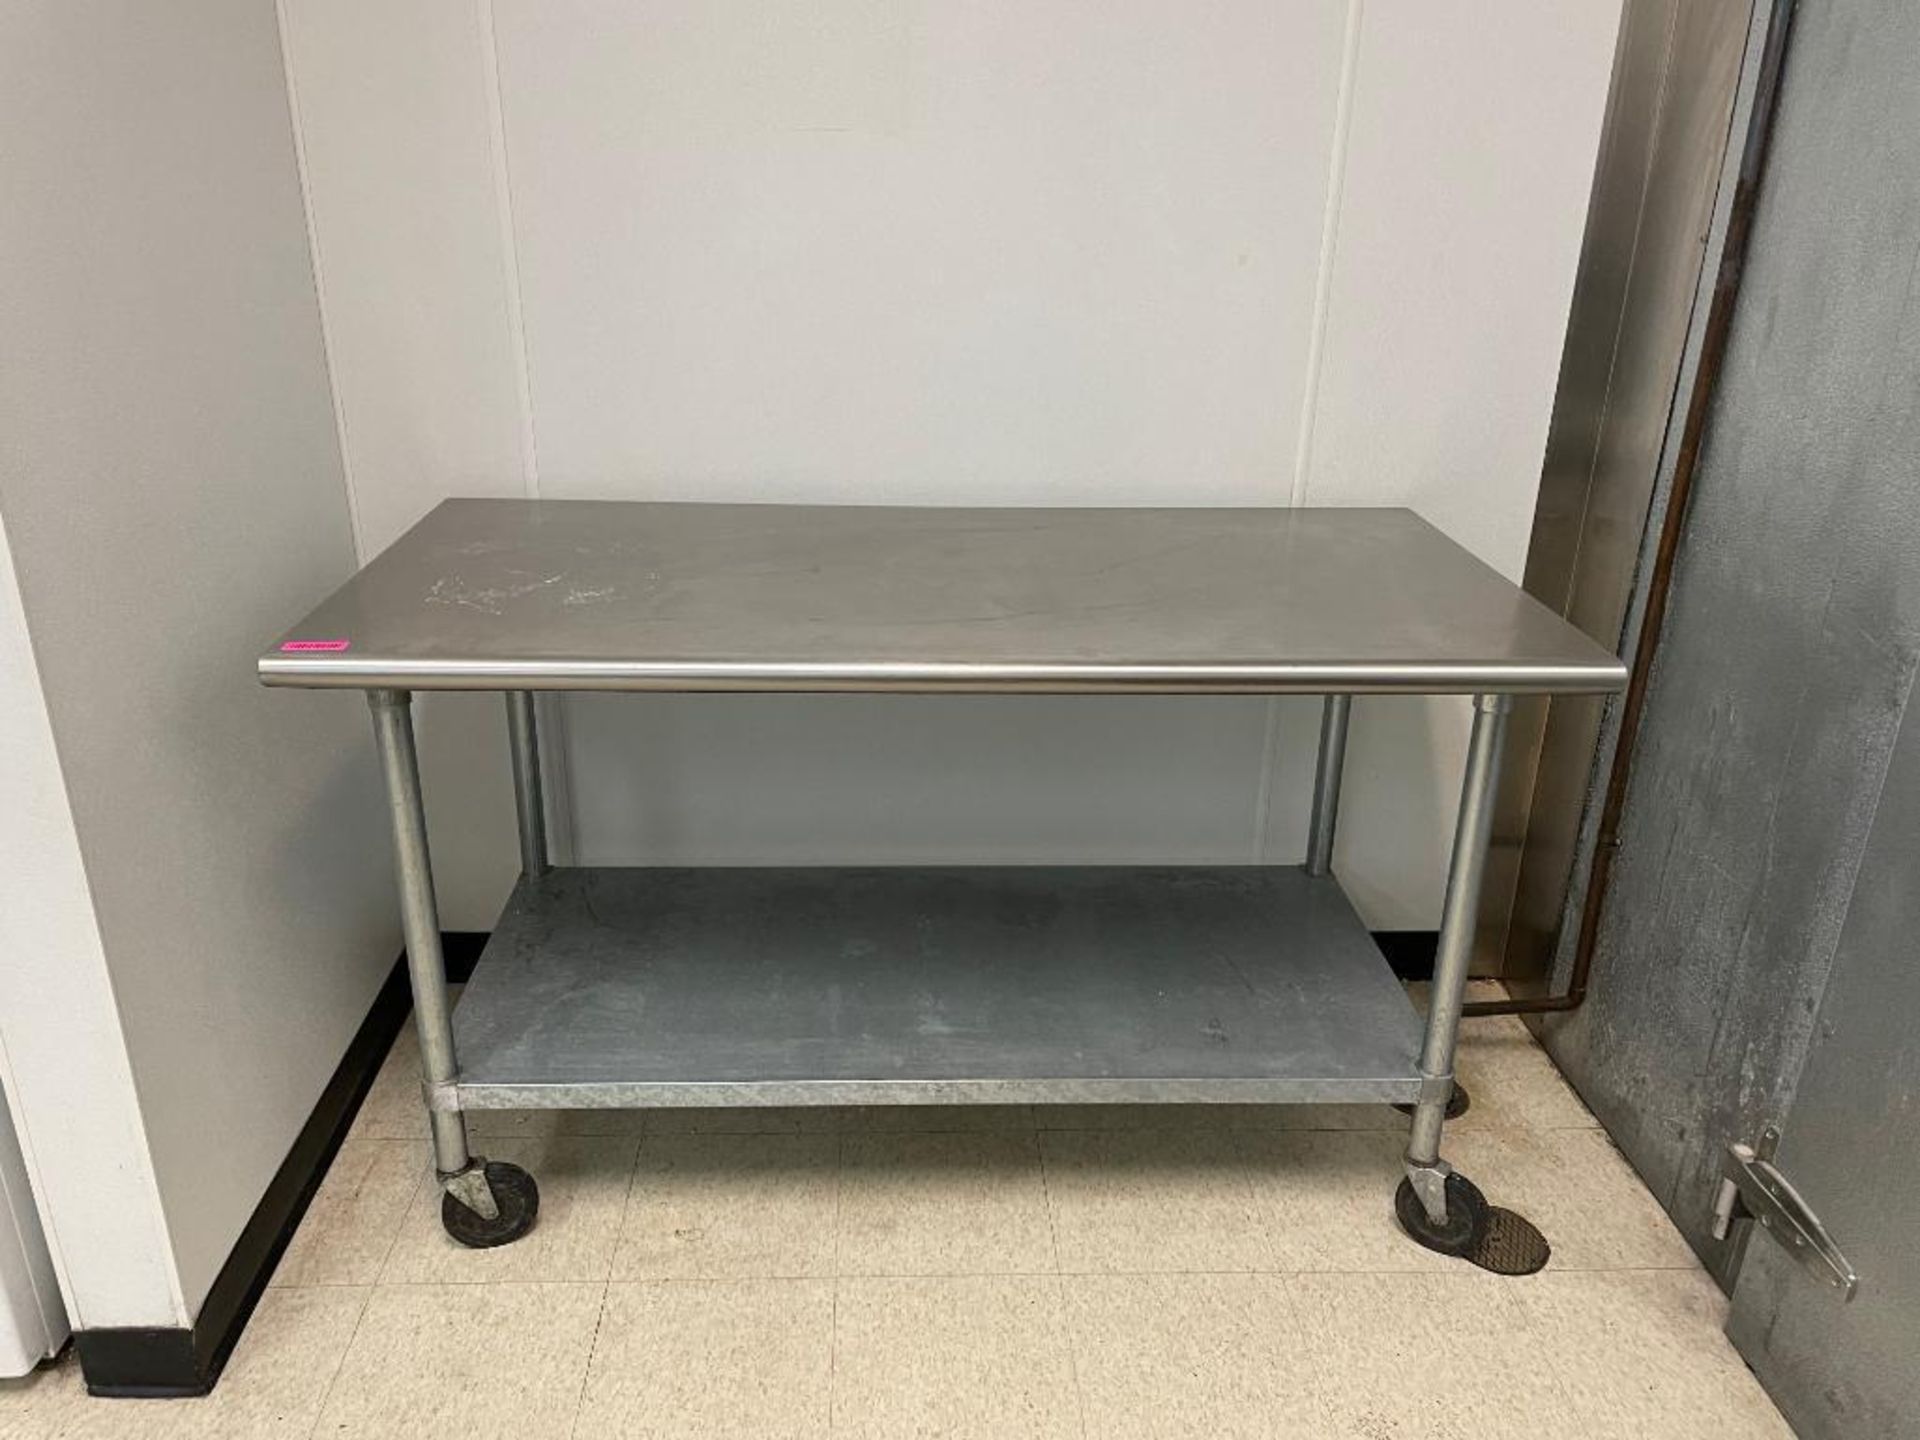 DESCRIPTION: 60" X 30" STAINLESS TABLE W/ UNDER SHELF. ADDITIONAL INFORMATION ON CASTERS. SIZE: 60" - Image 2 of 4